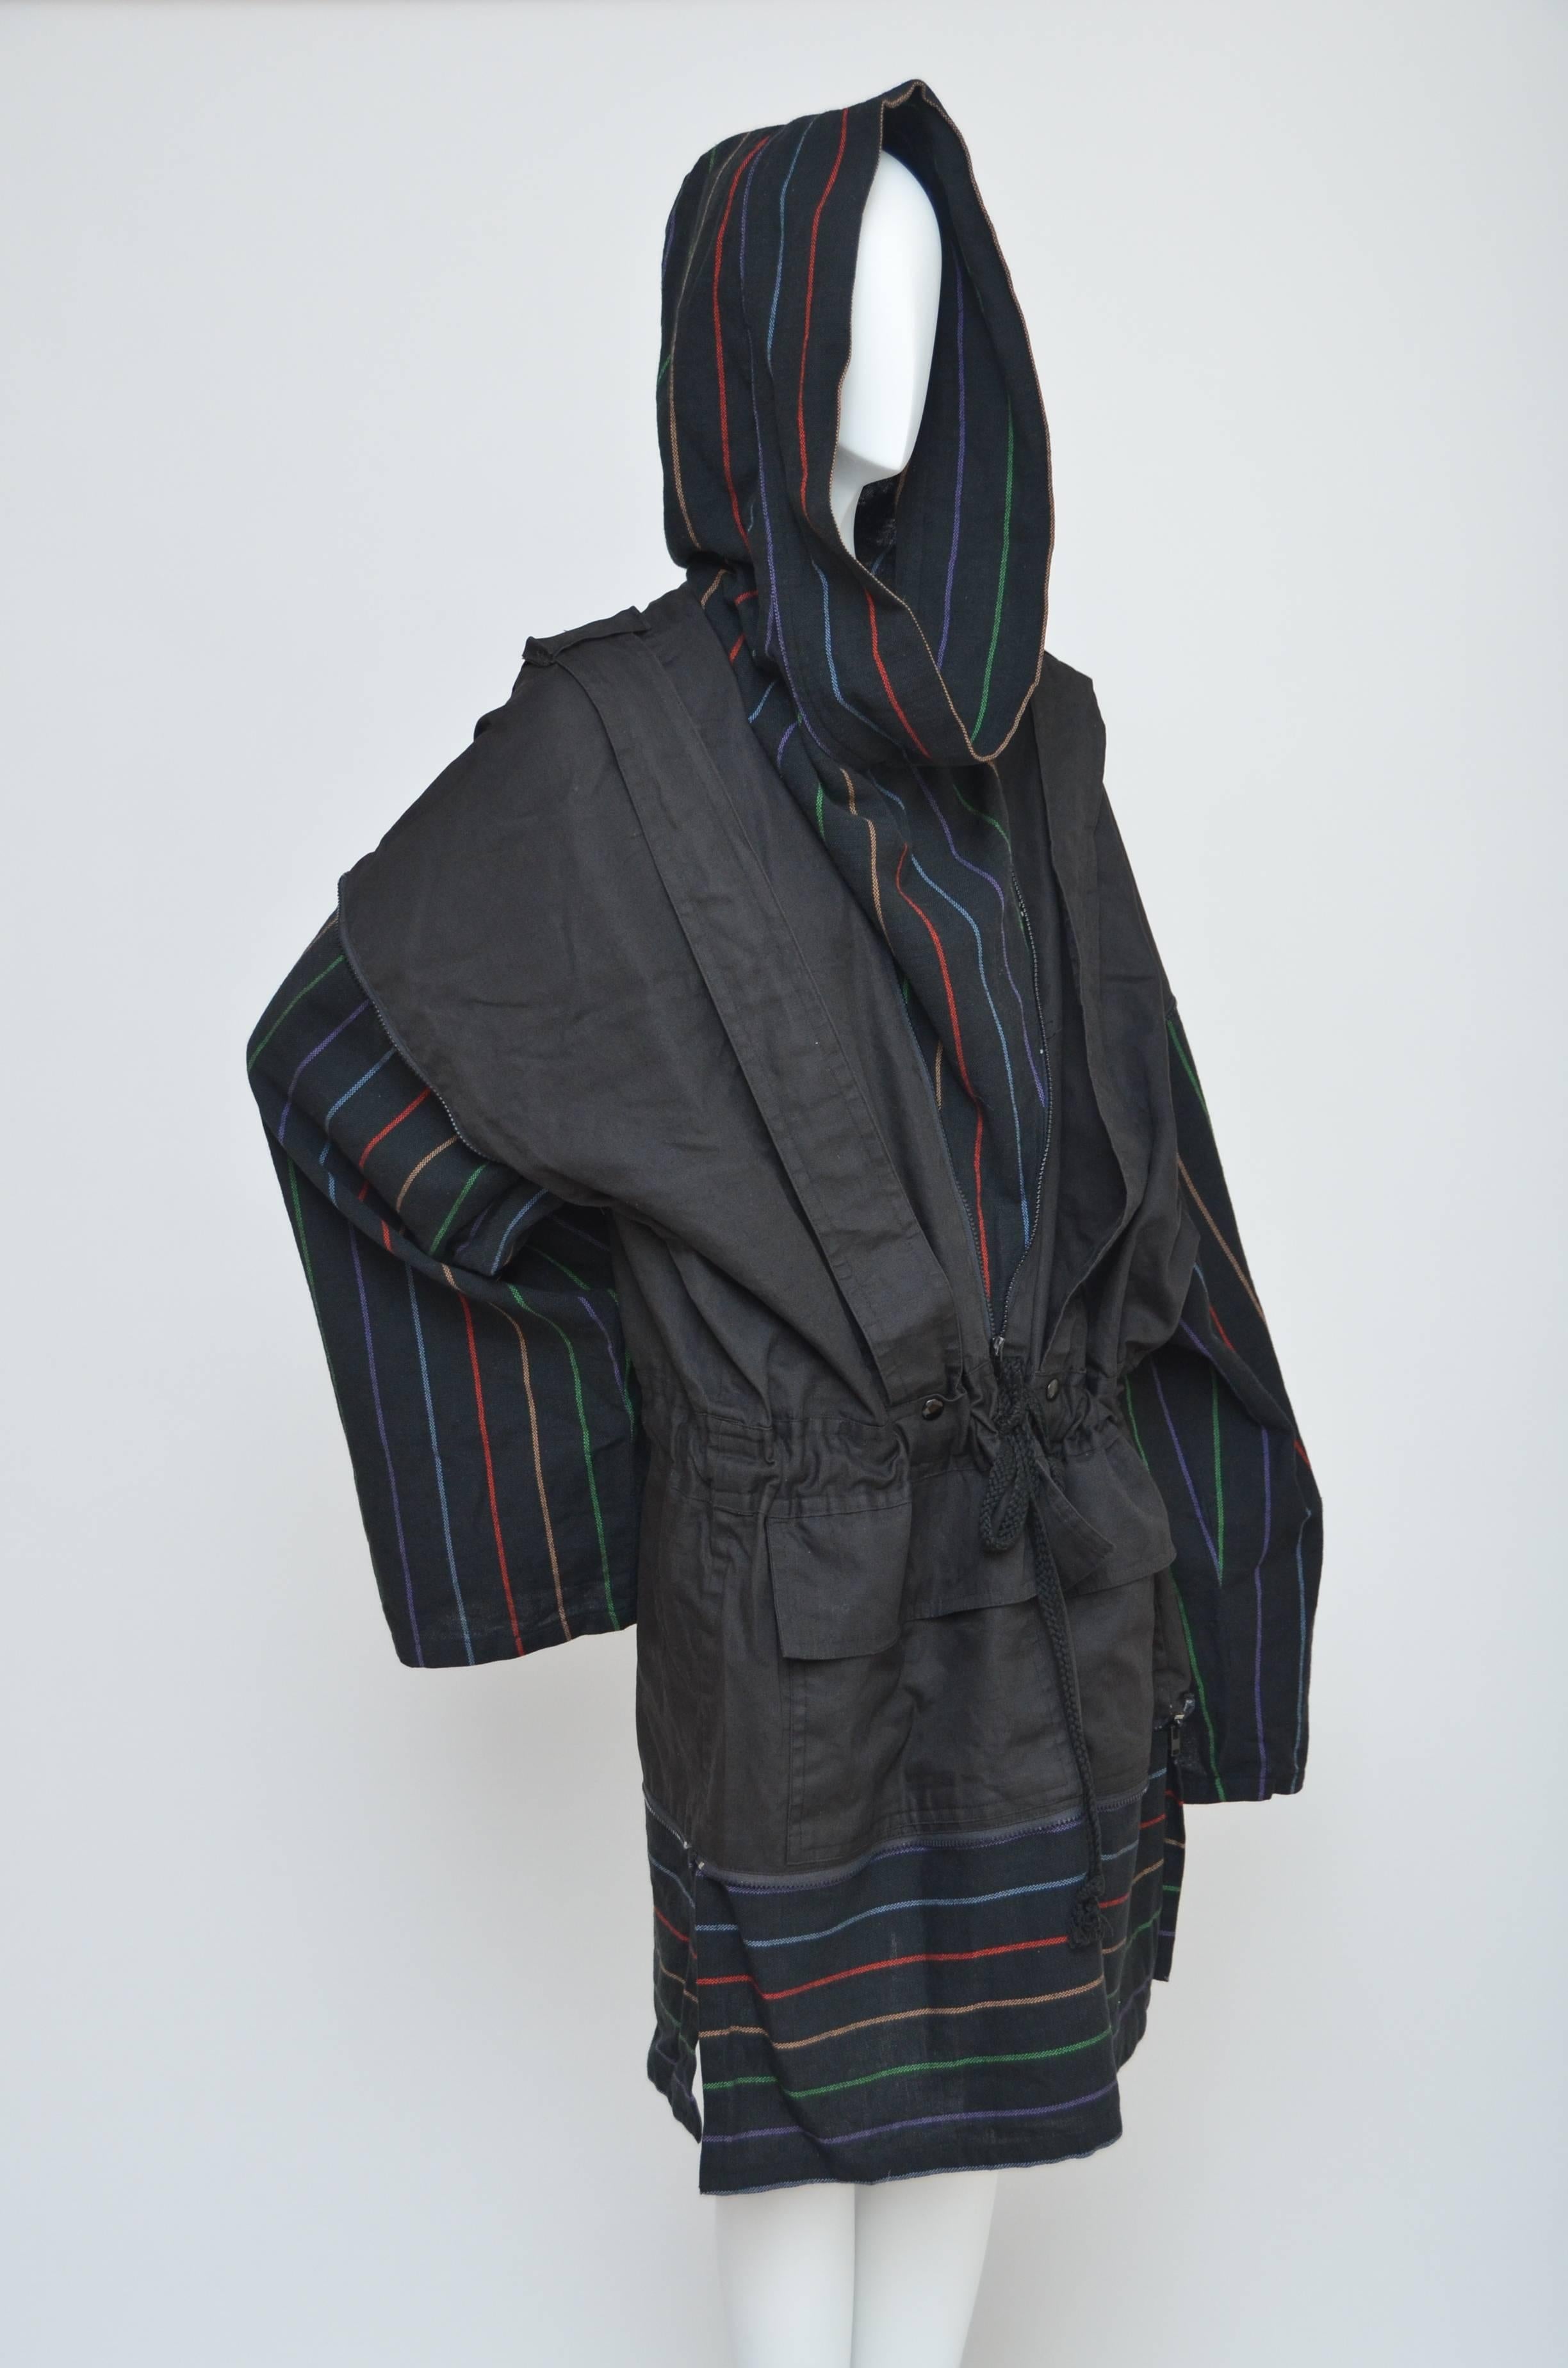 Amazing  design from  Issey Miyake  1970's era.
Convertible backpack/anorak jacket and  Miyake very early design.
Multiple zippers construction :from the sleeves that can be zipped up and tucked in as well as  hoodie  and the bottom  once everything